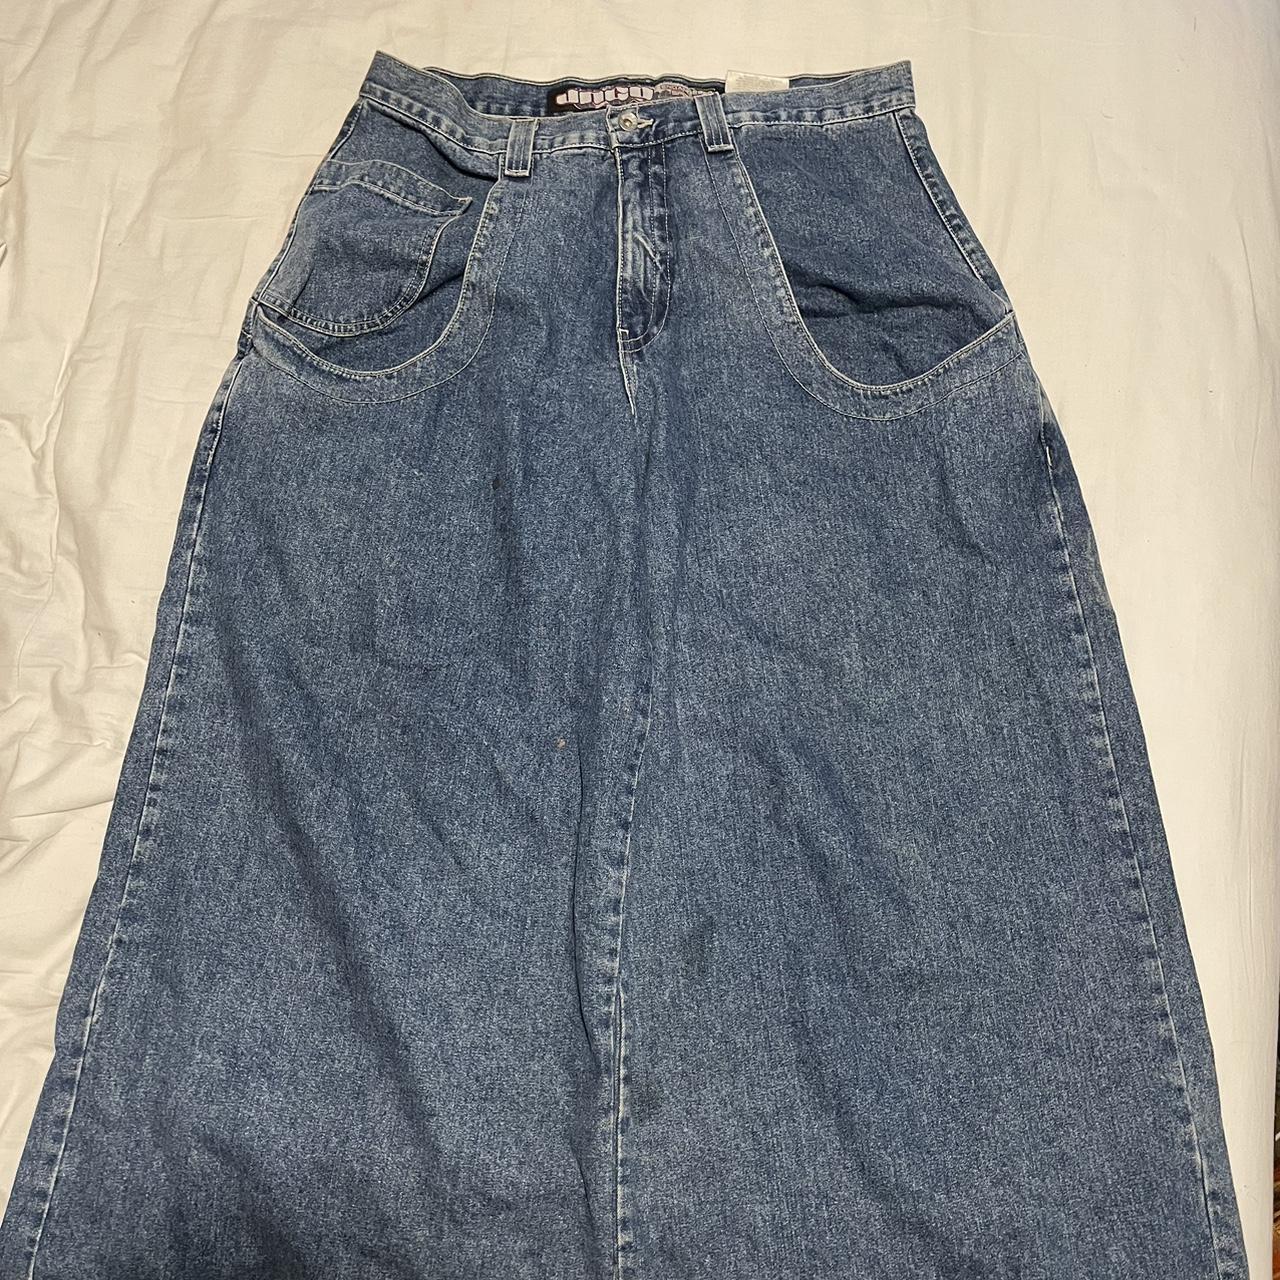 Endangered species JNCO jeans with giant pockets,... - Depop